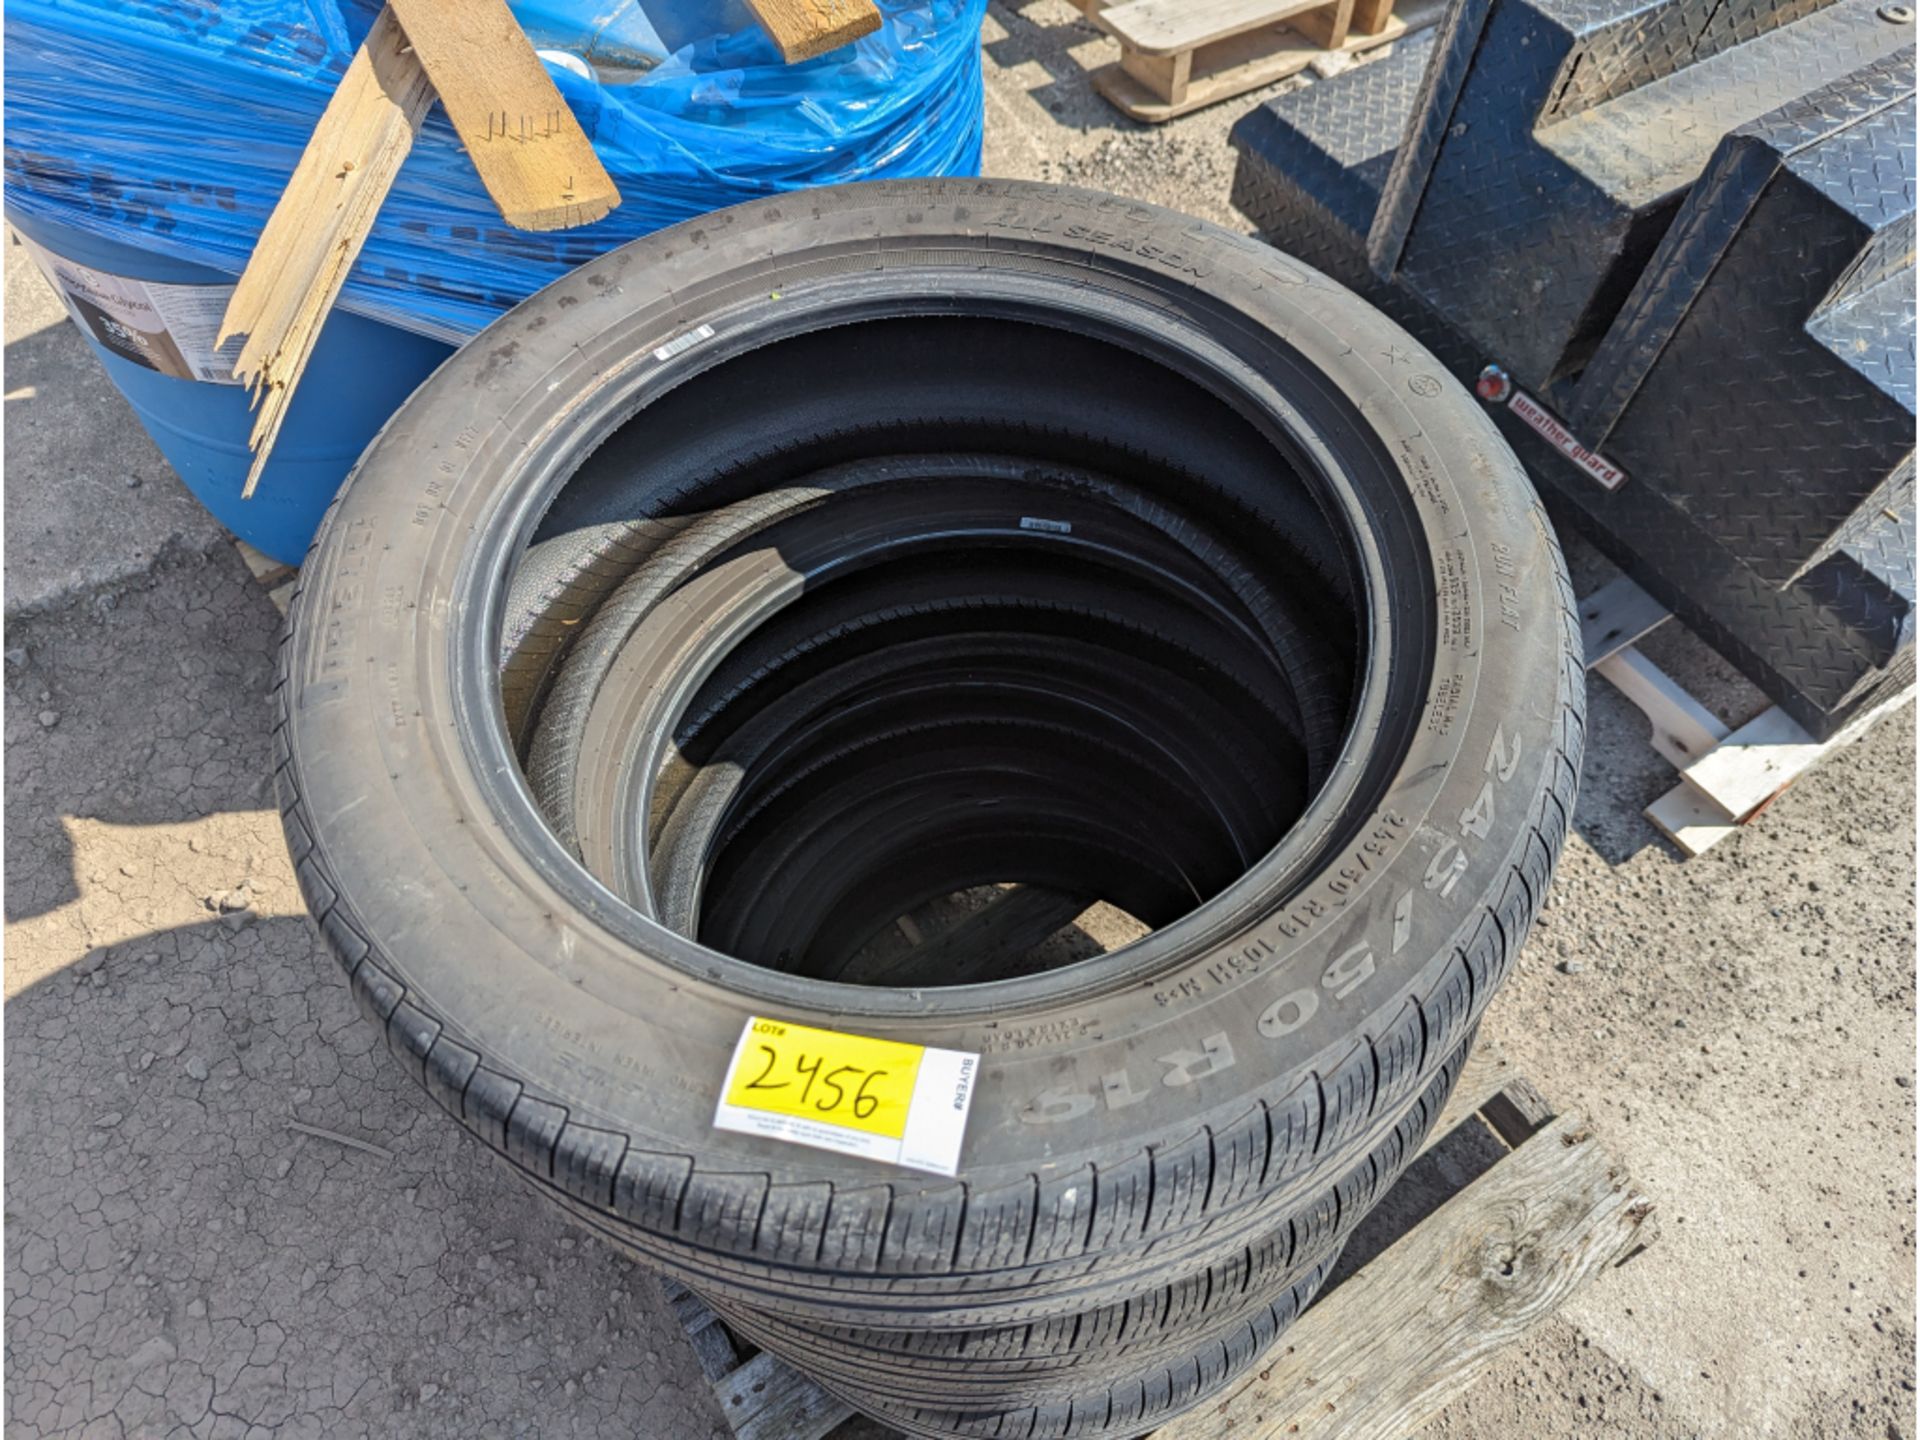 Cinturato P7 245/50R19 Tires, Came off 2021 BMW X3 w/ 35k Miles, Run Flats - Image 3 of 5